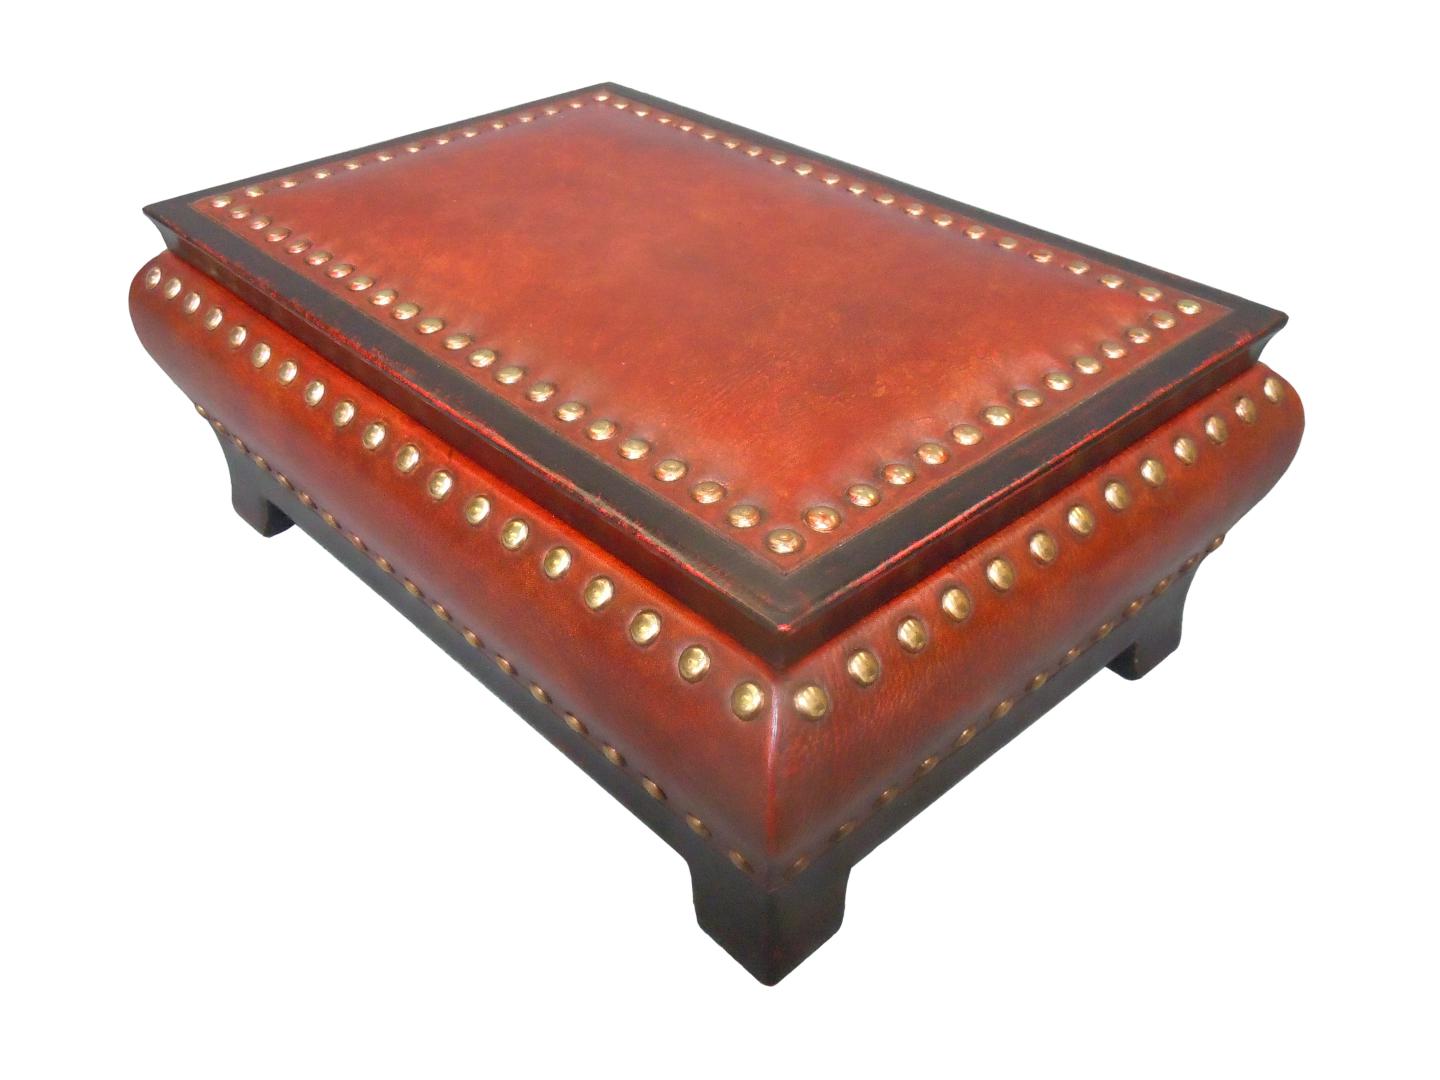 leather box with a rivets design on the top and around the piece